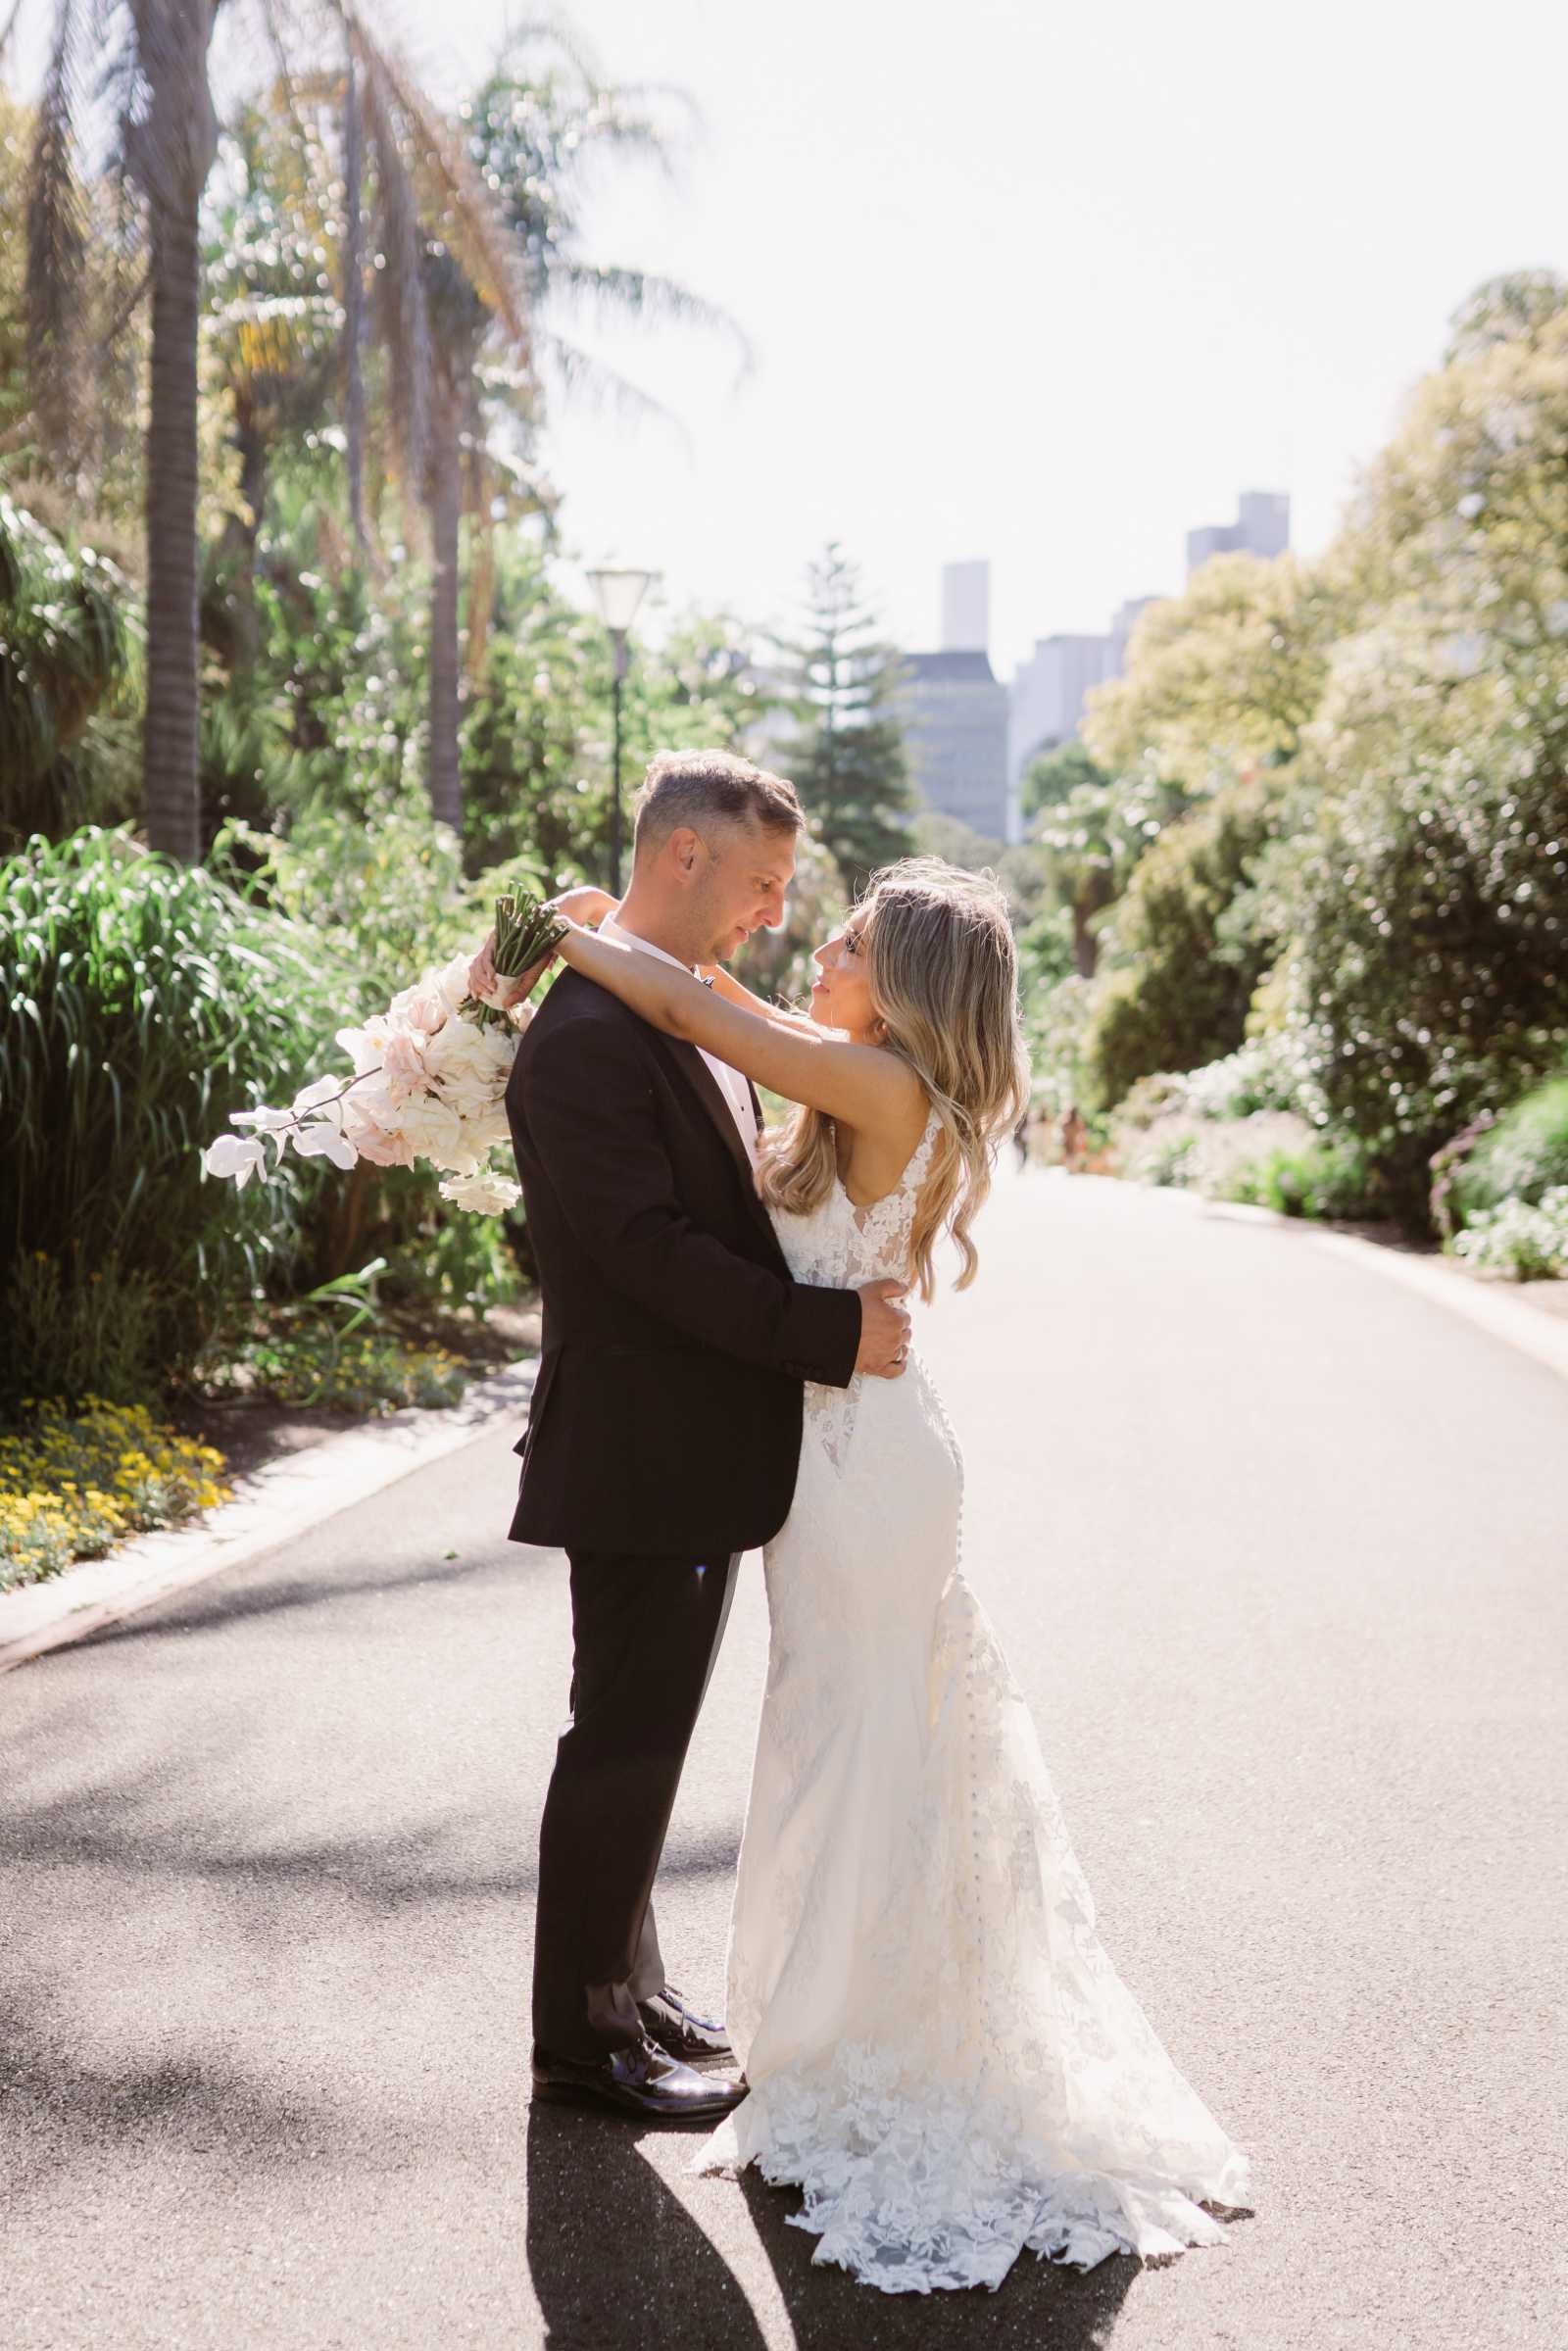 Modern and romantic for Elyse and Drazen's San Remo Ballroom wedding in Melbourne. Photographed by Theodore & Co.